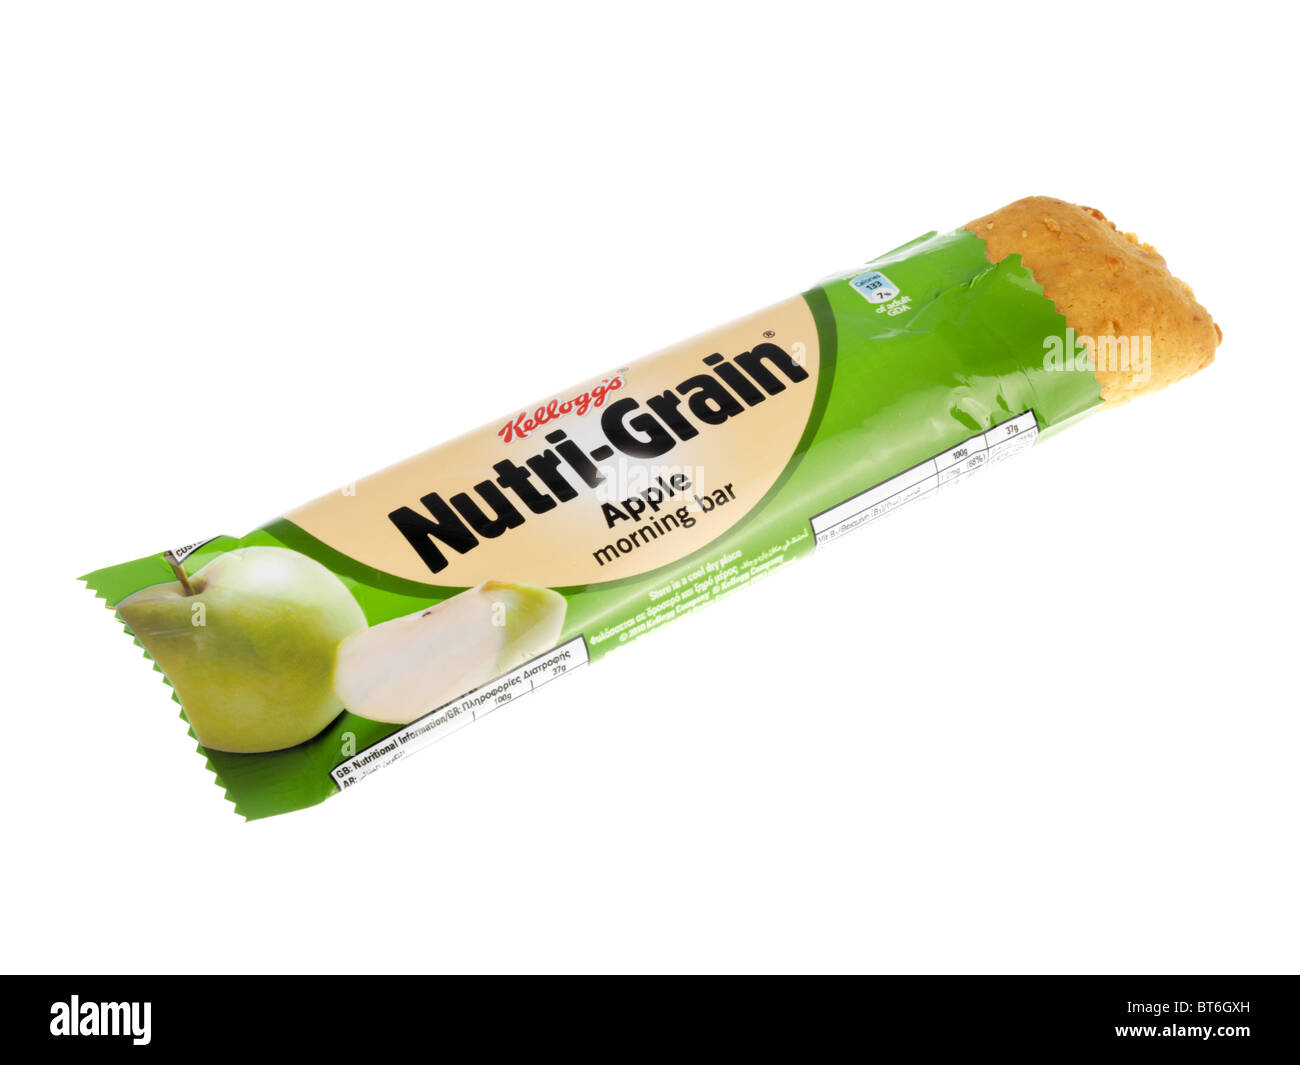 Apple Cereal Bar Stock Photo